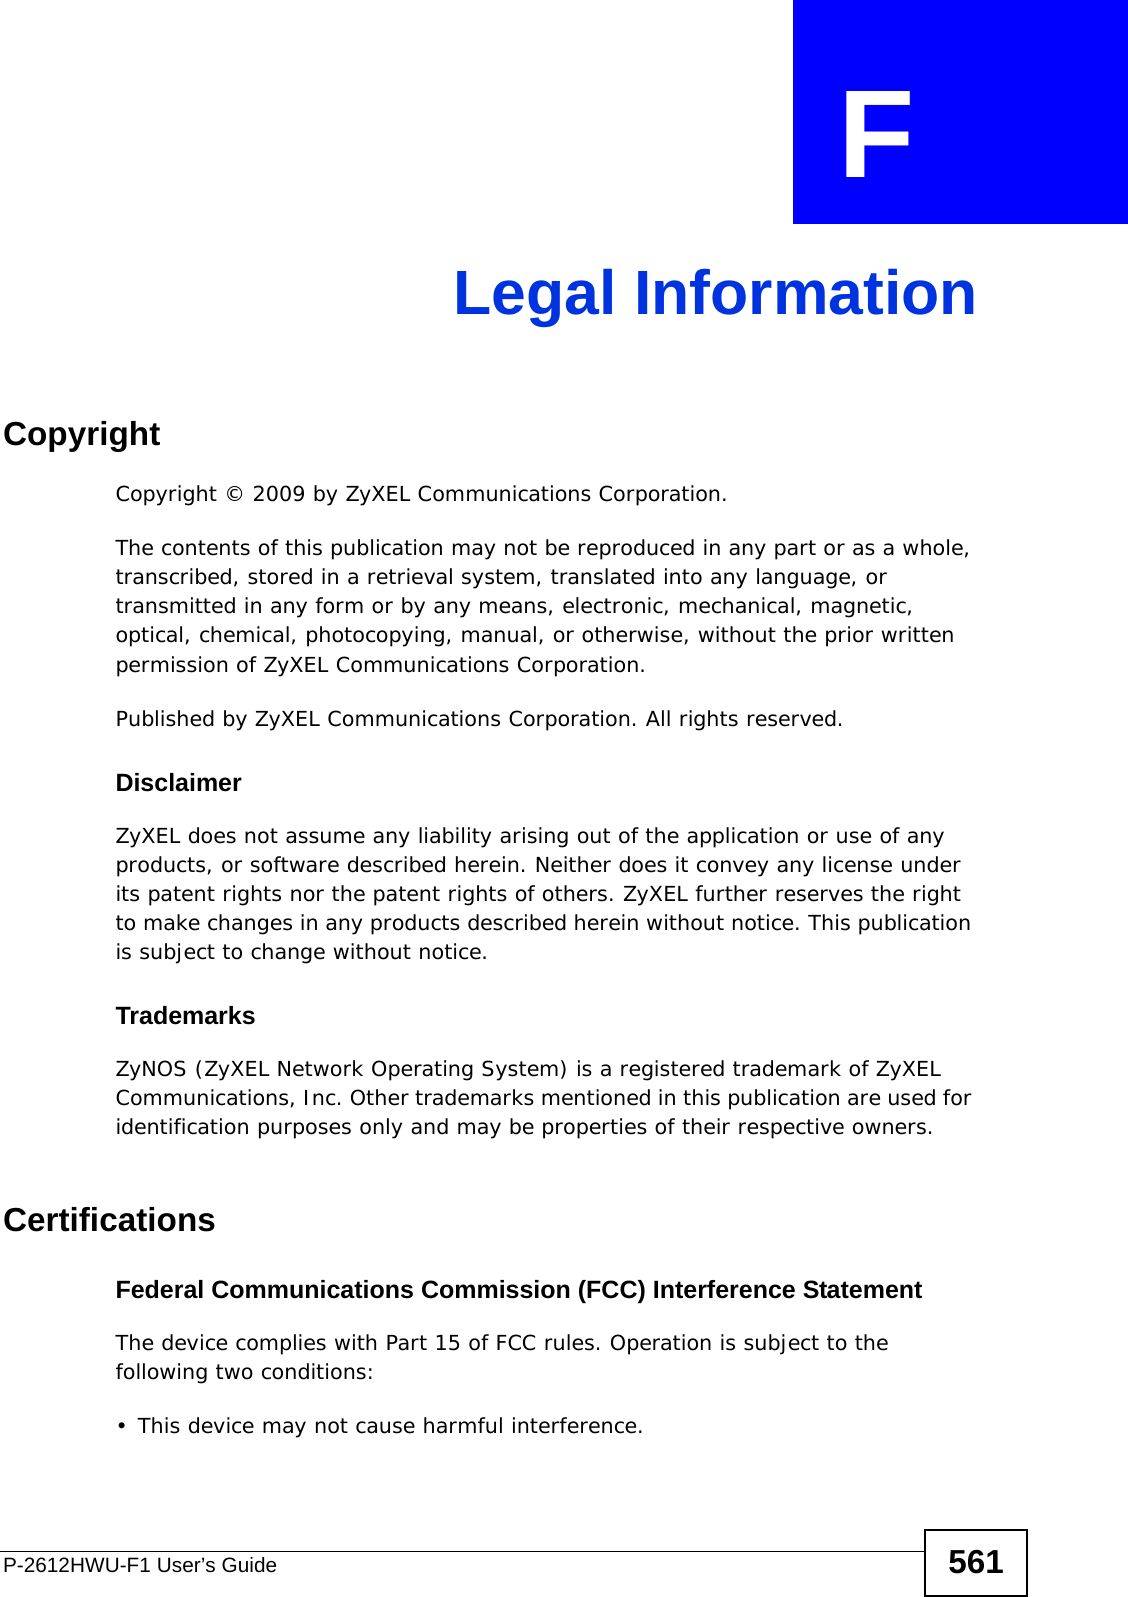 P-2612HWU-F1 User’s Guide 561APPENDIX  F Legal InformationCopyrightCopyright © 2009 by ZyXEL Communications Corporation.The contents of this publication may not be reproduced in any part or as a whole, transcribed, stored in a retrieval system, translated into any language, or transmitted in any form or by any means, electronic, mechanical, magnetic, optical, chemical, photocopying, manual, or otherwise, without the prior written permission of ZyXEL Communications Corporation.Published by ZyXEL Communications Corporation. All rights reserved.DisclaimerZyXEL does not assume any liability arising out of the application or use of any products, or software described herein. Neither does it convey any license under its patent rights nor the patent rights of others. ZyXEL further reserves the right to make changes in any products described herein without notice. This publication is subject to change without notice.TrademarksZyNOS (ZyXEL Network Operating System) is a registered trademark of ZyXEL Communications, Inc. Other trademarks mentioned in this publication are used for identification purposes only and may be properties of their respective owners.Certifications Federal Communications Commission (FCC) Interference StatementThe device complies with Part 15 of FCC rules. Operation is subject to the following two conditions:• This device may not cause harmful interference.